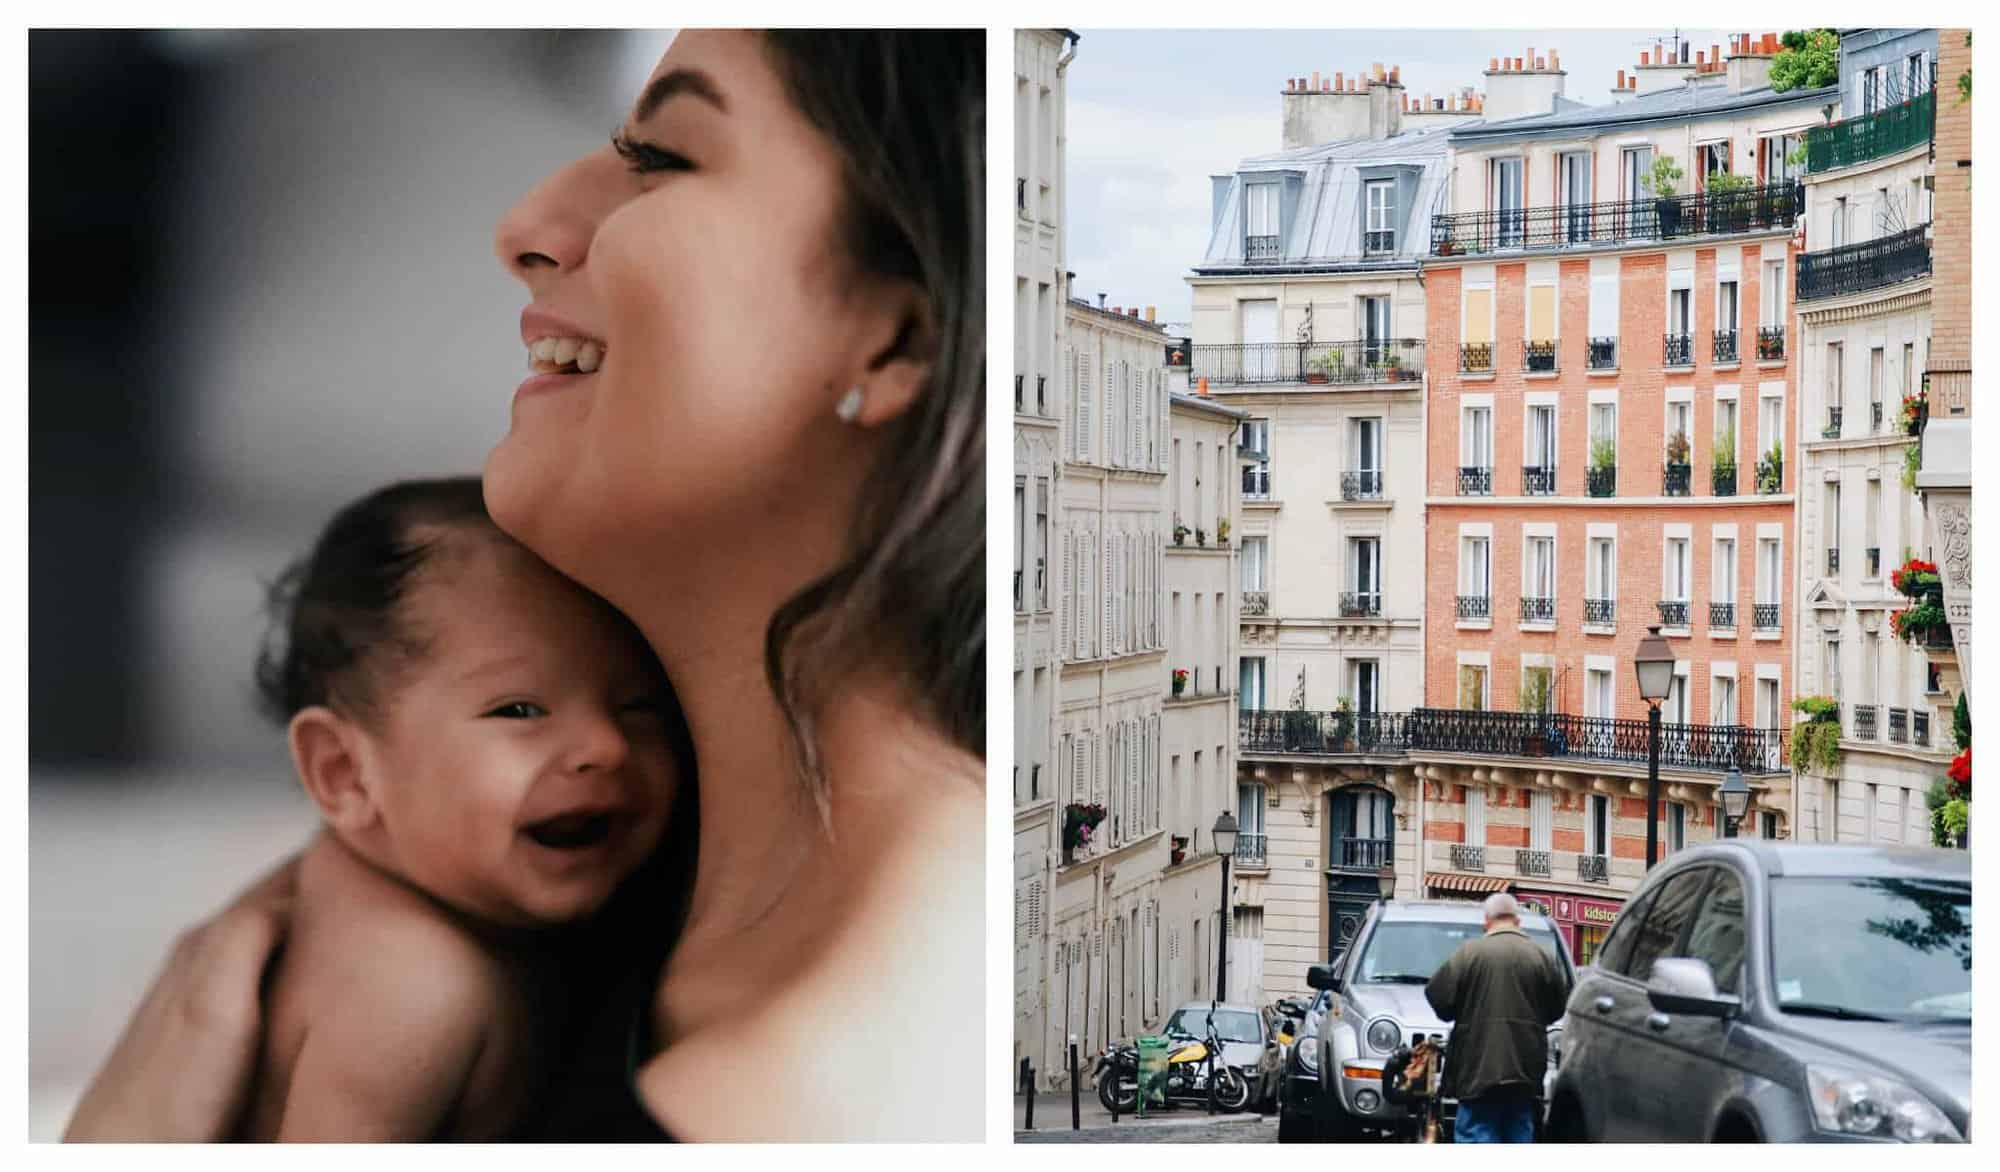 Left: A smiling mom with black hair holds a smiling newborn baby in her arms; Right: A quiet curved Parisian street filled with beige buildings and a man passing with his bicycle.